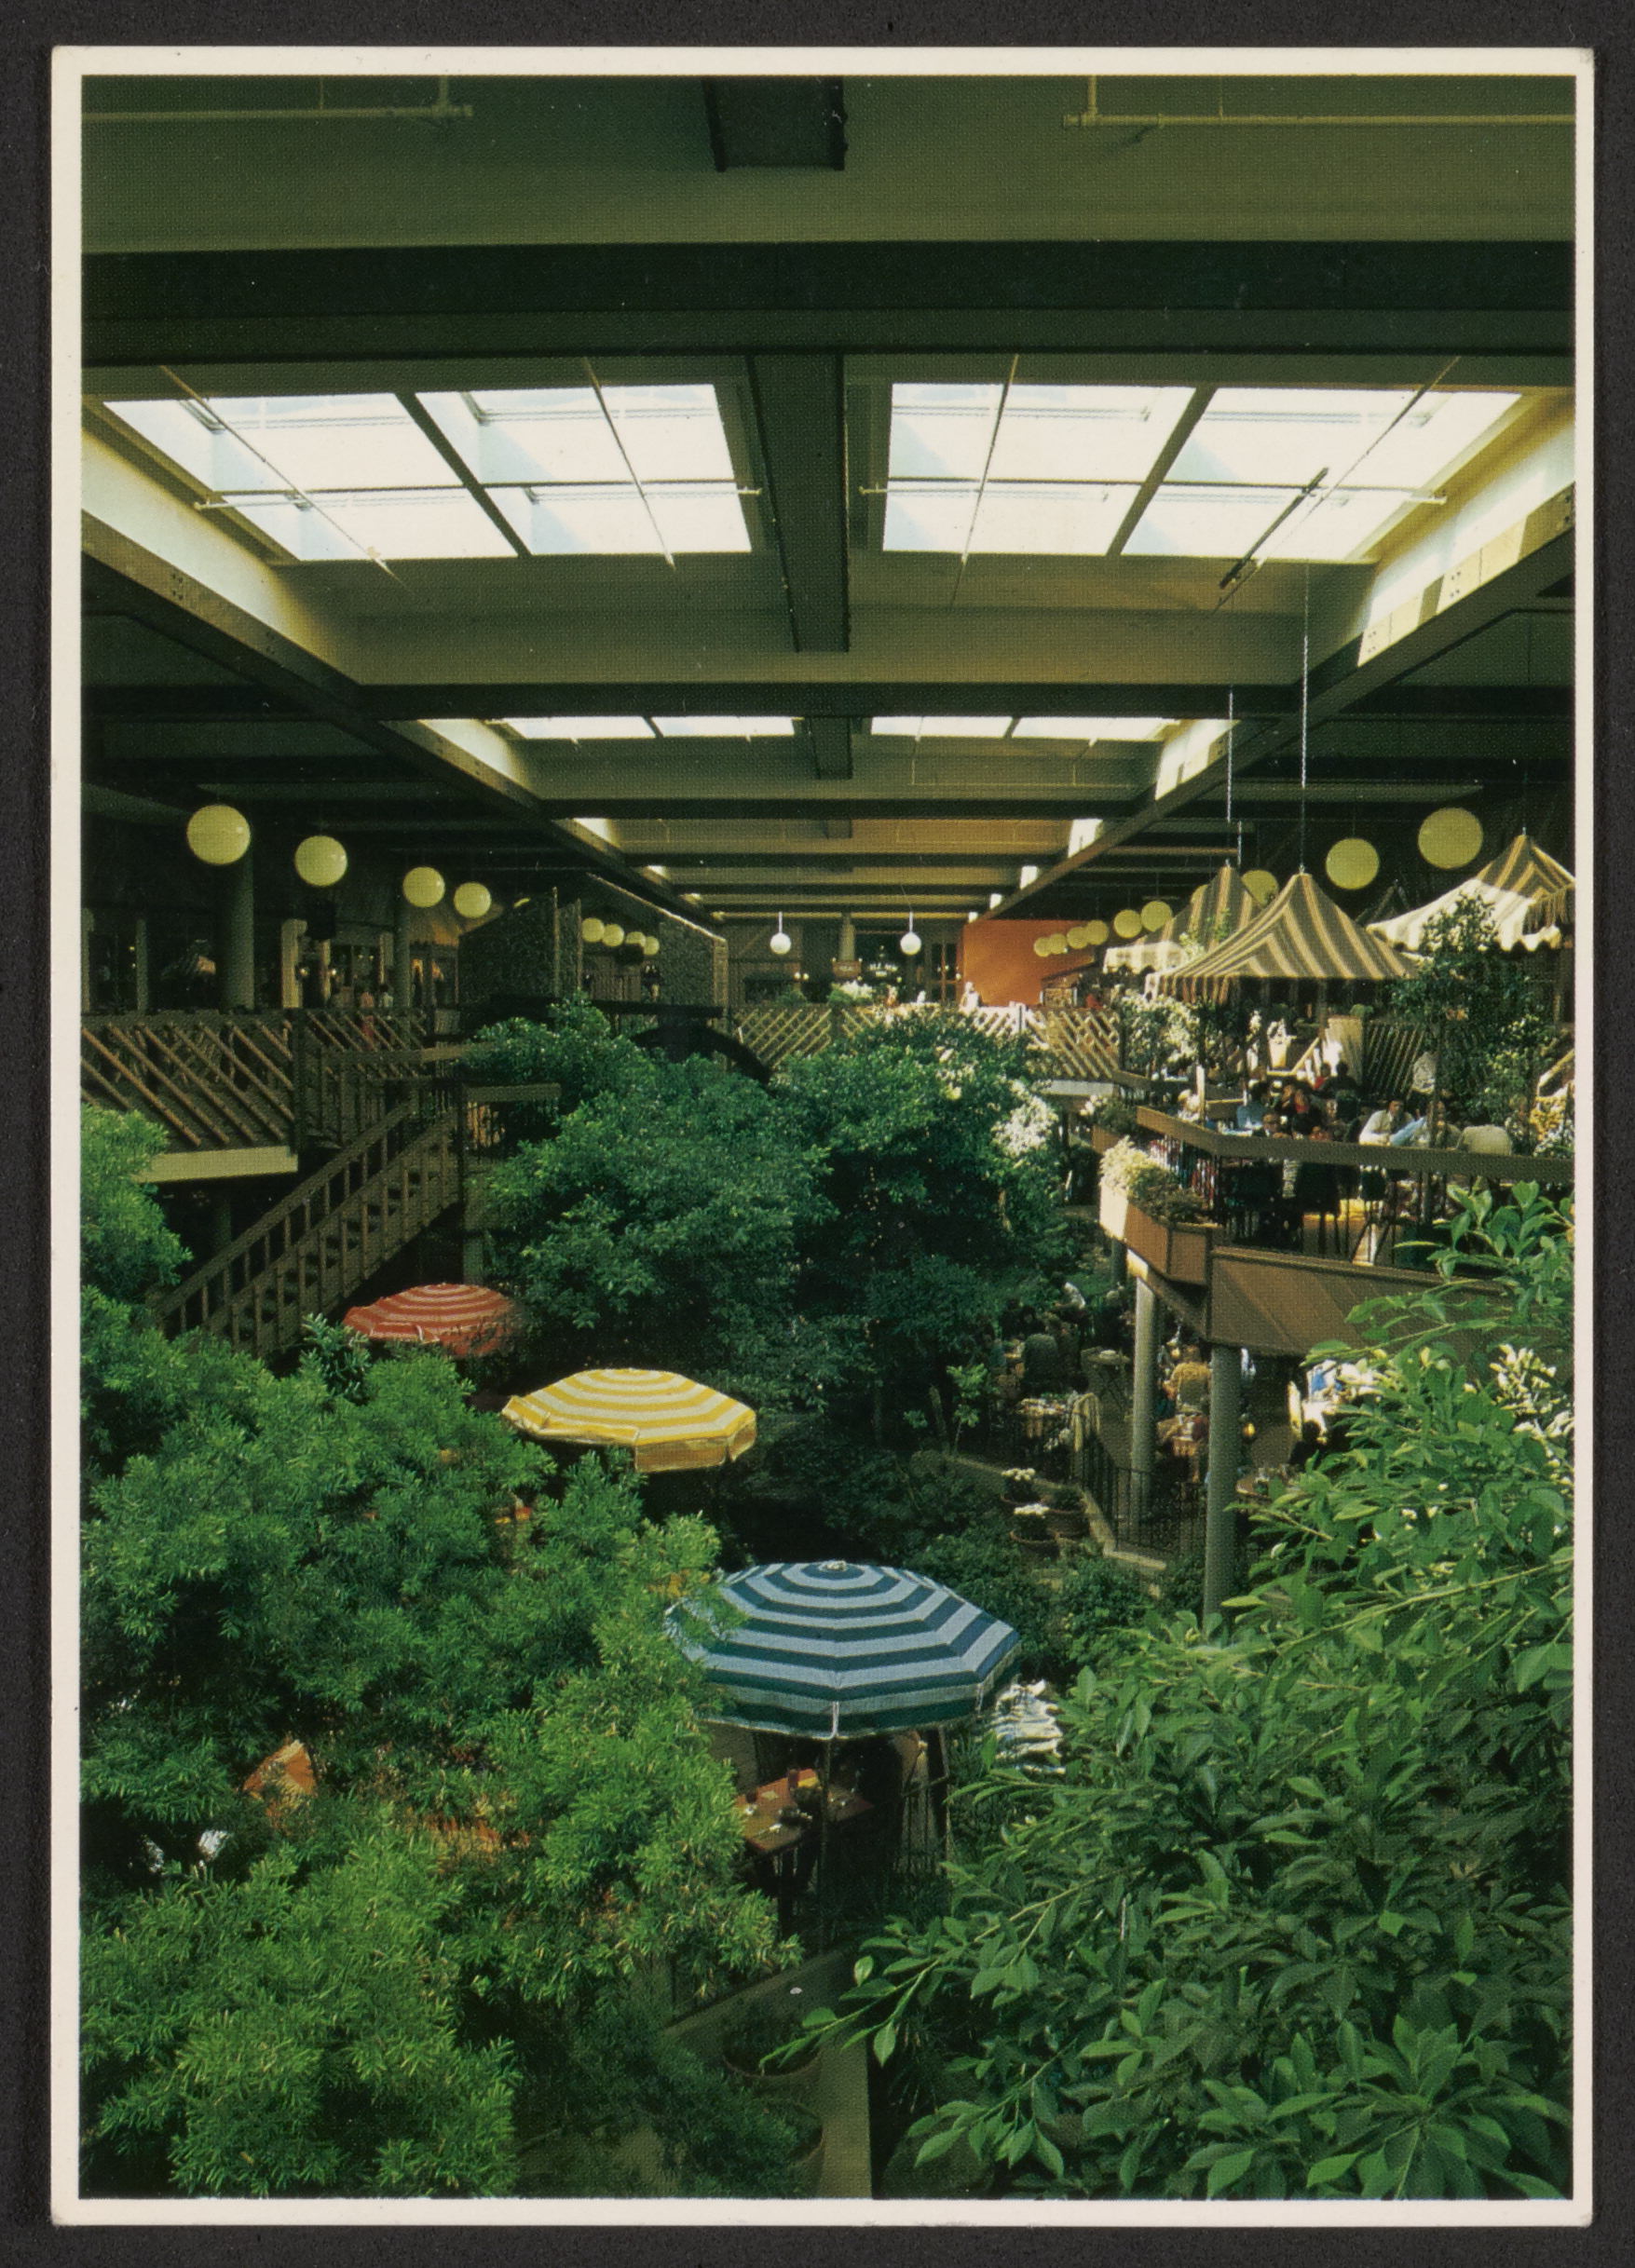 Interior of the Old Mill Shopping Center